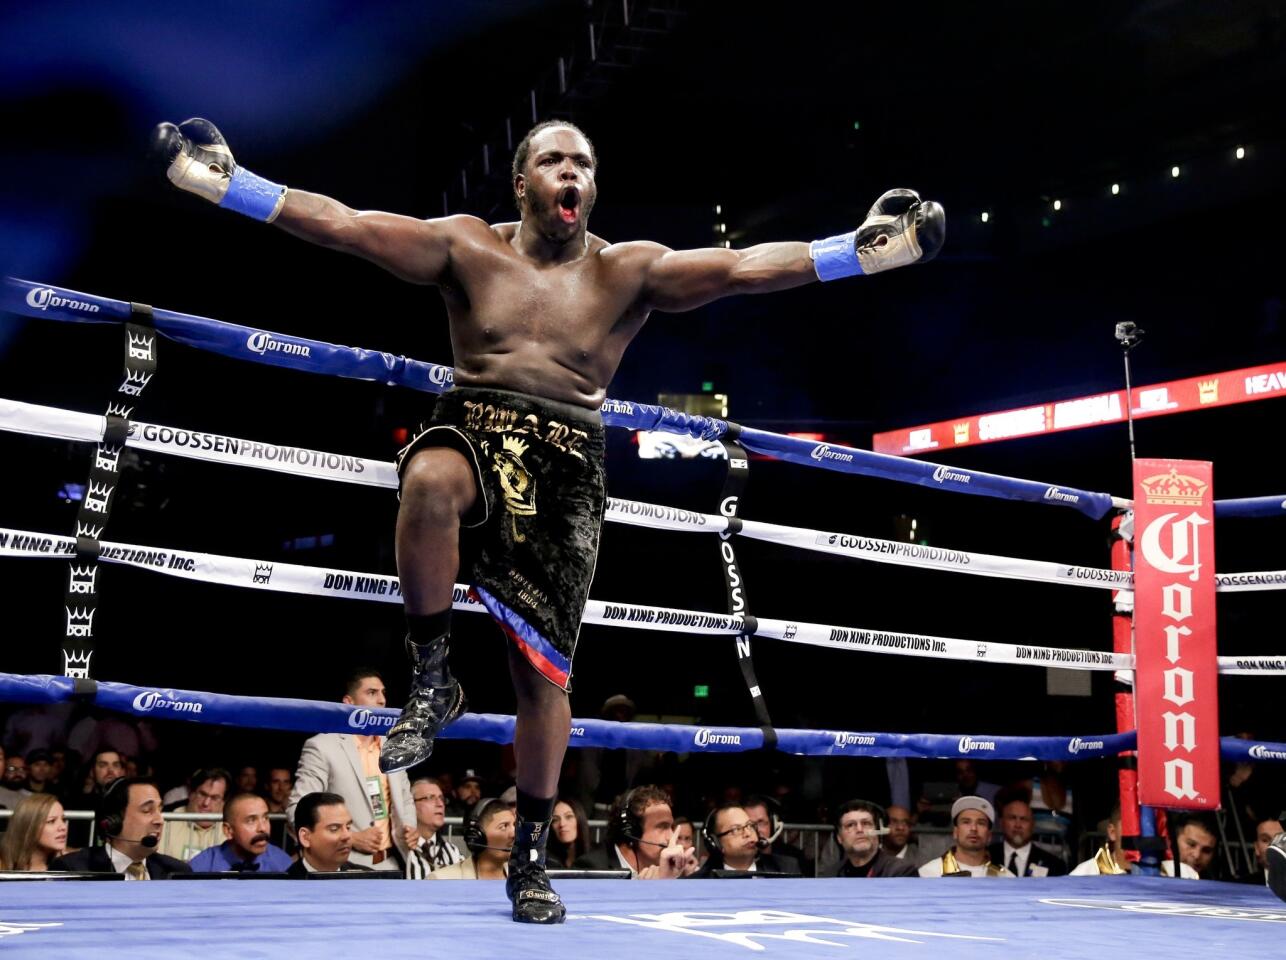 Bermane Stiverne enjoys the moment after winning the WBC heavyweight belt by stopping Chris Arreola in the sixth round Saturday at Galen Center.